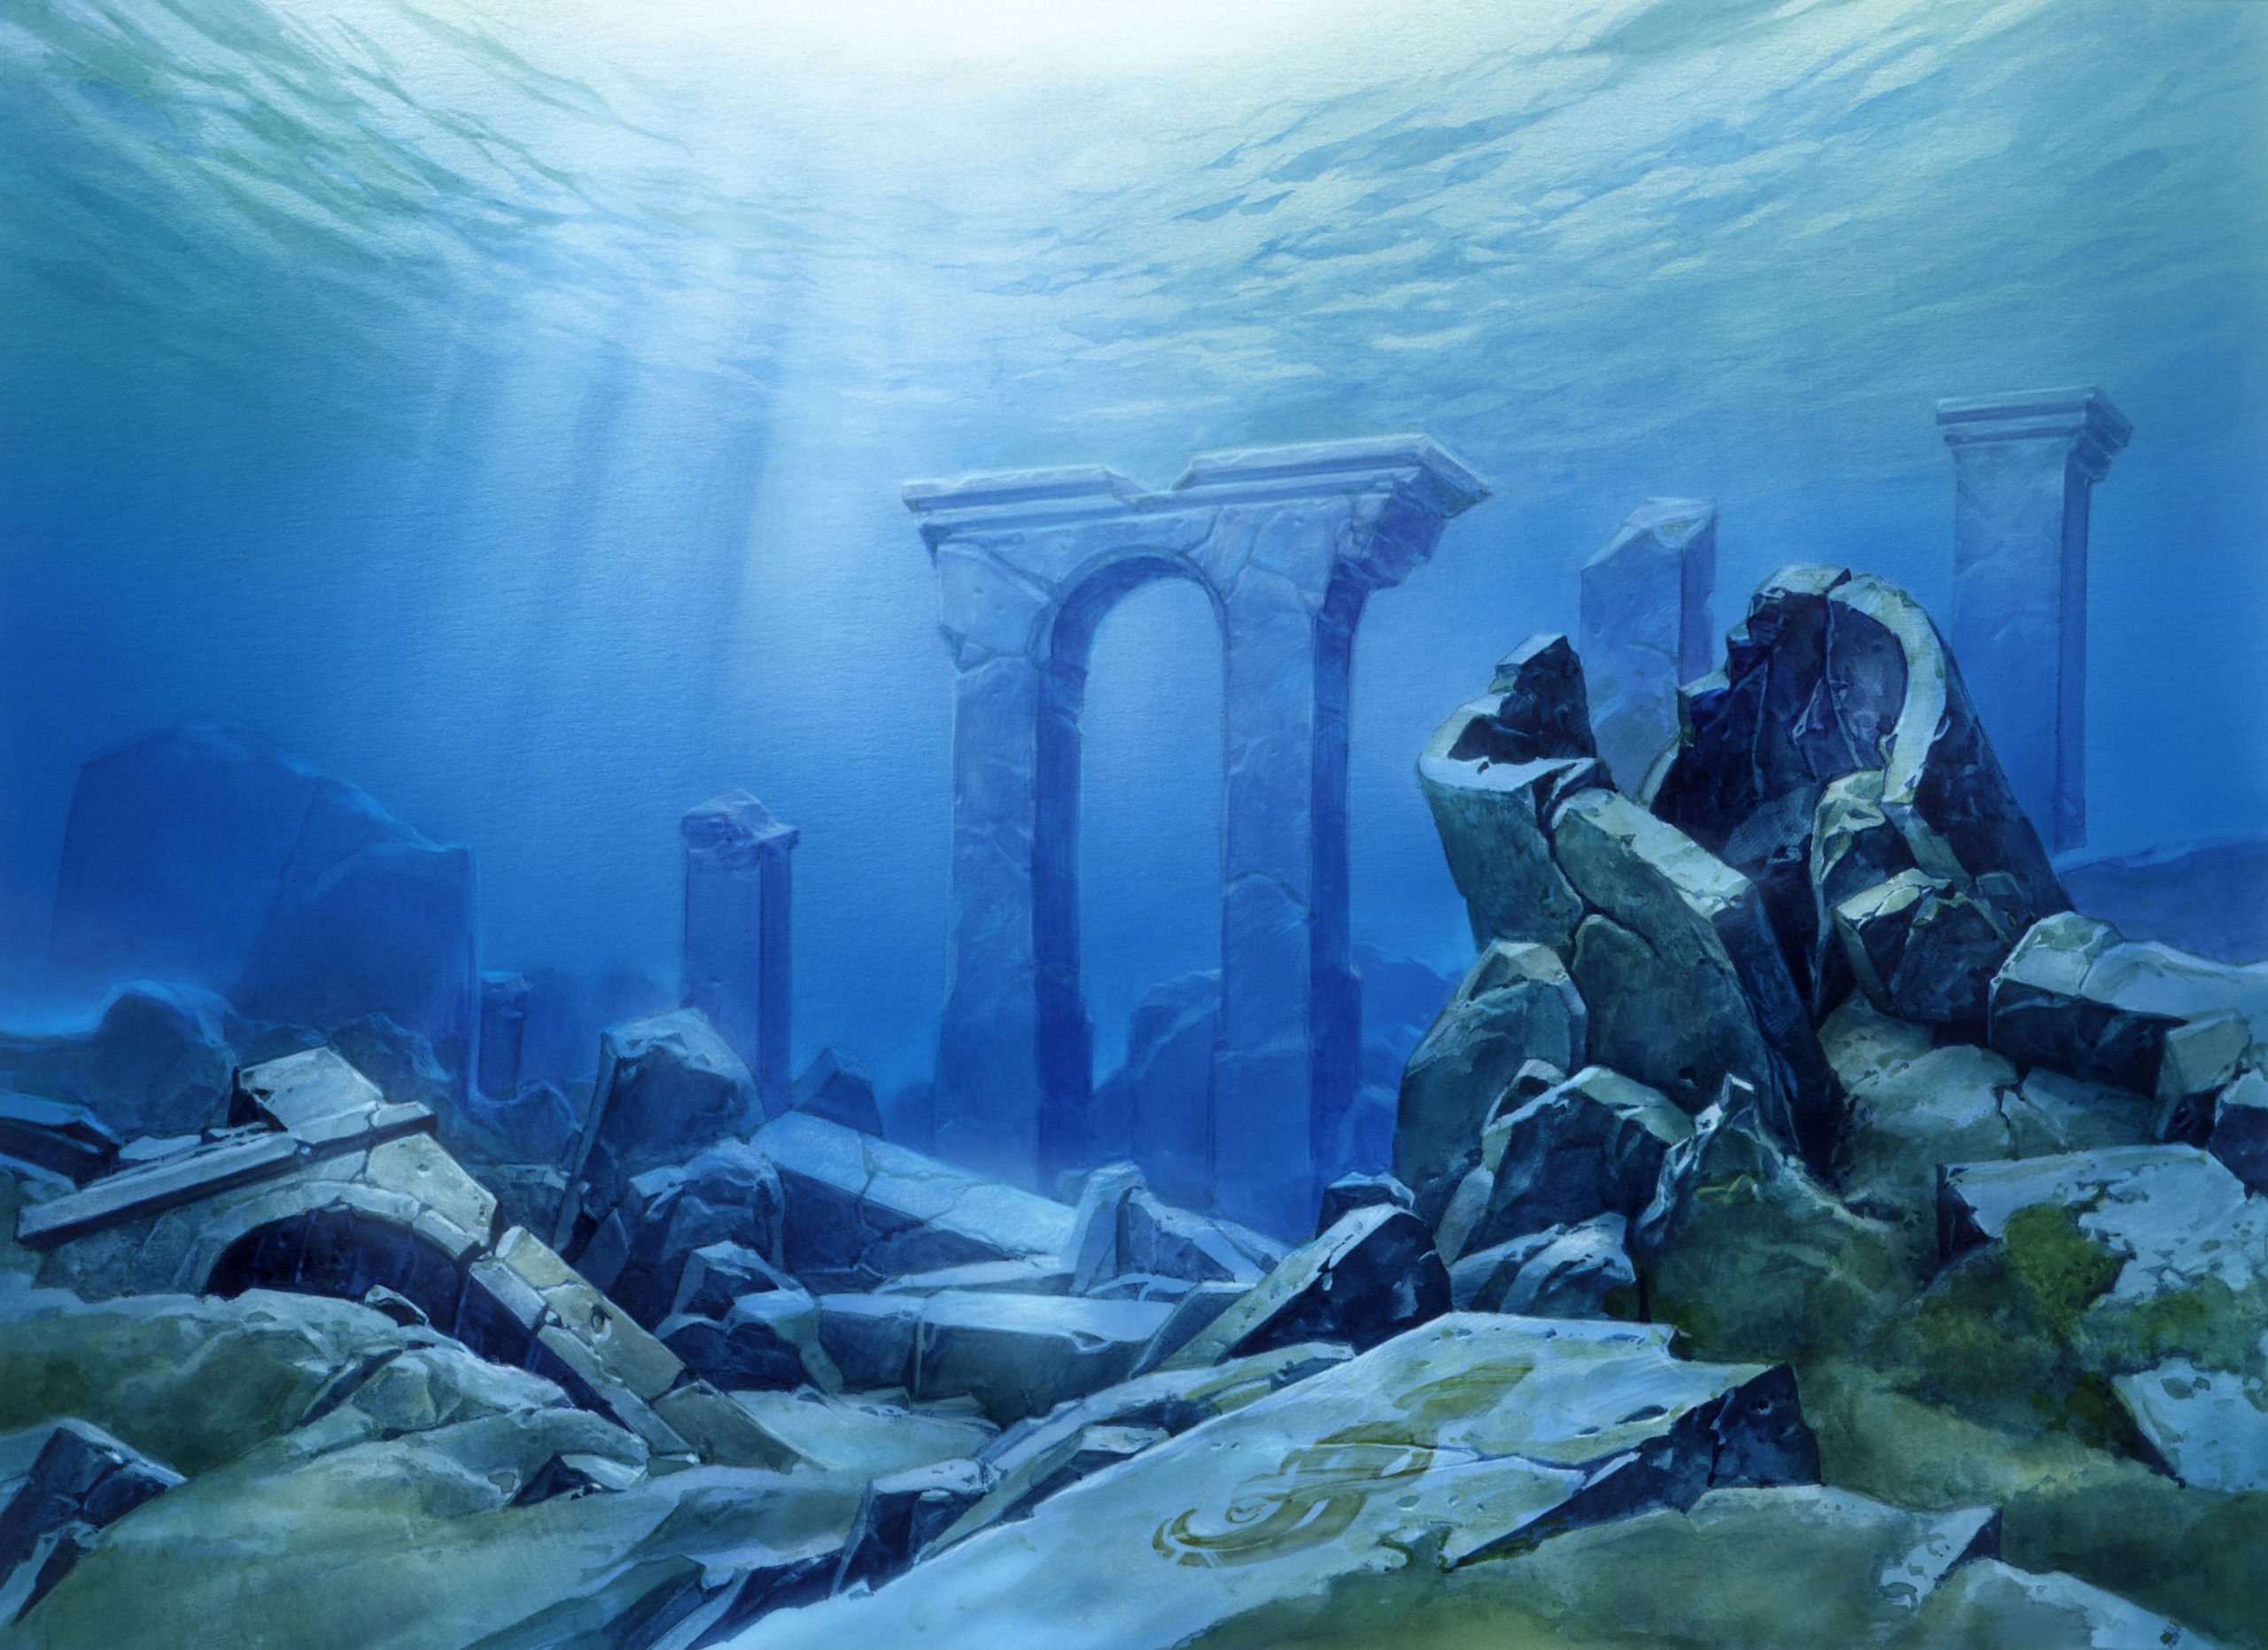 Academy Ruins - Magic:the Gathering Illustration - © Wizards of the Coast